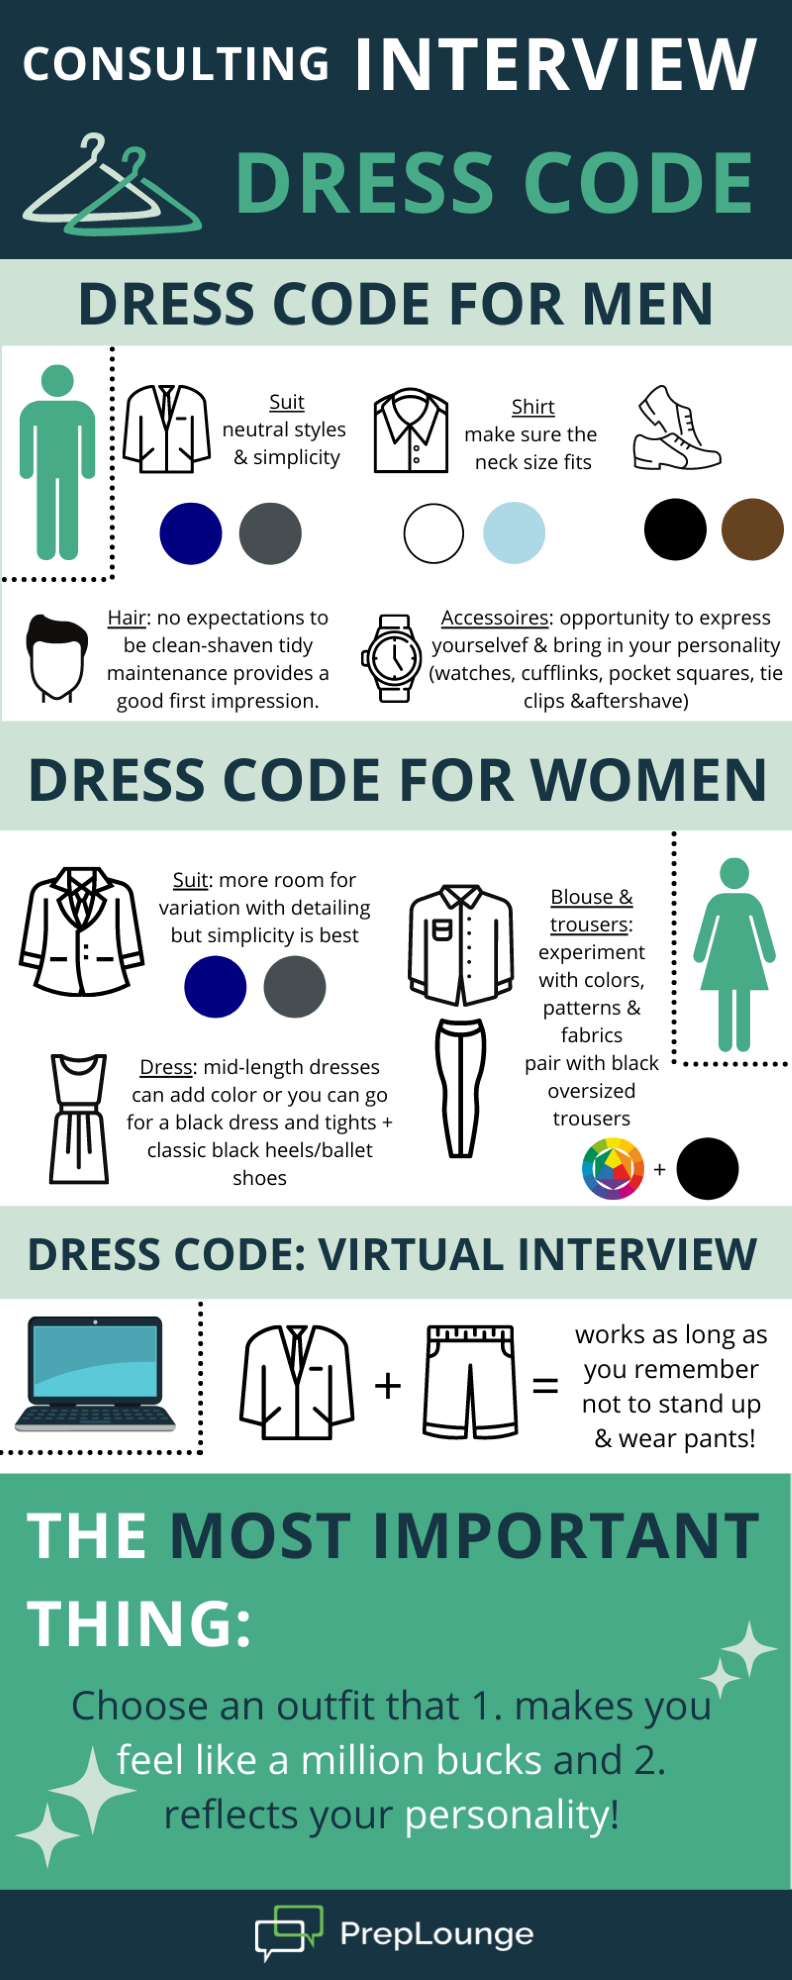 Consulting Interview Dress Code Visual